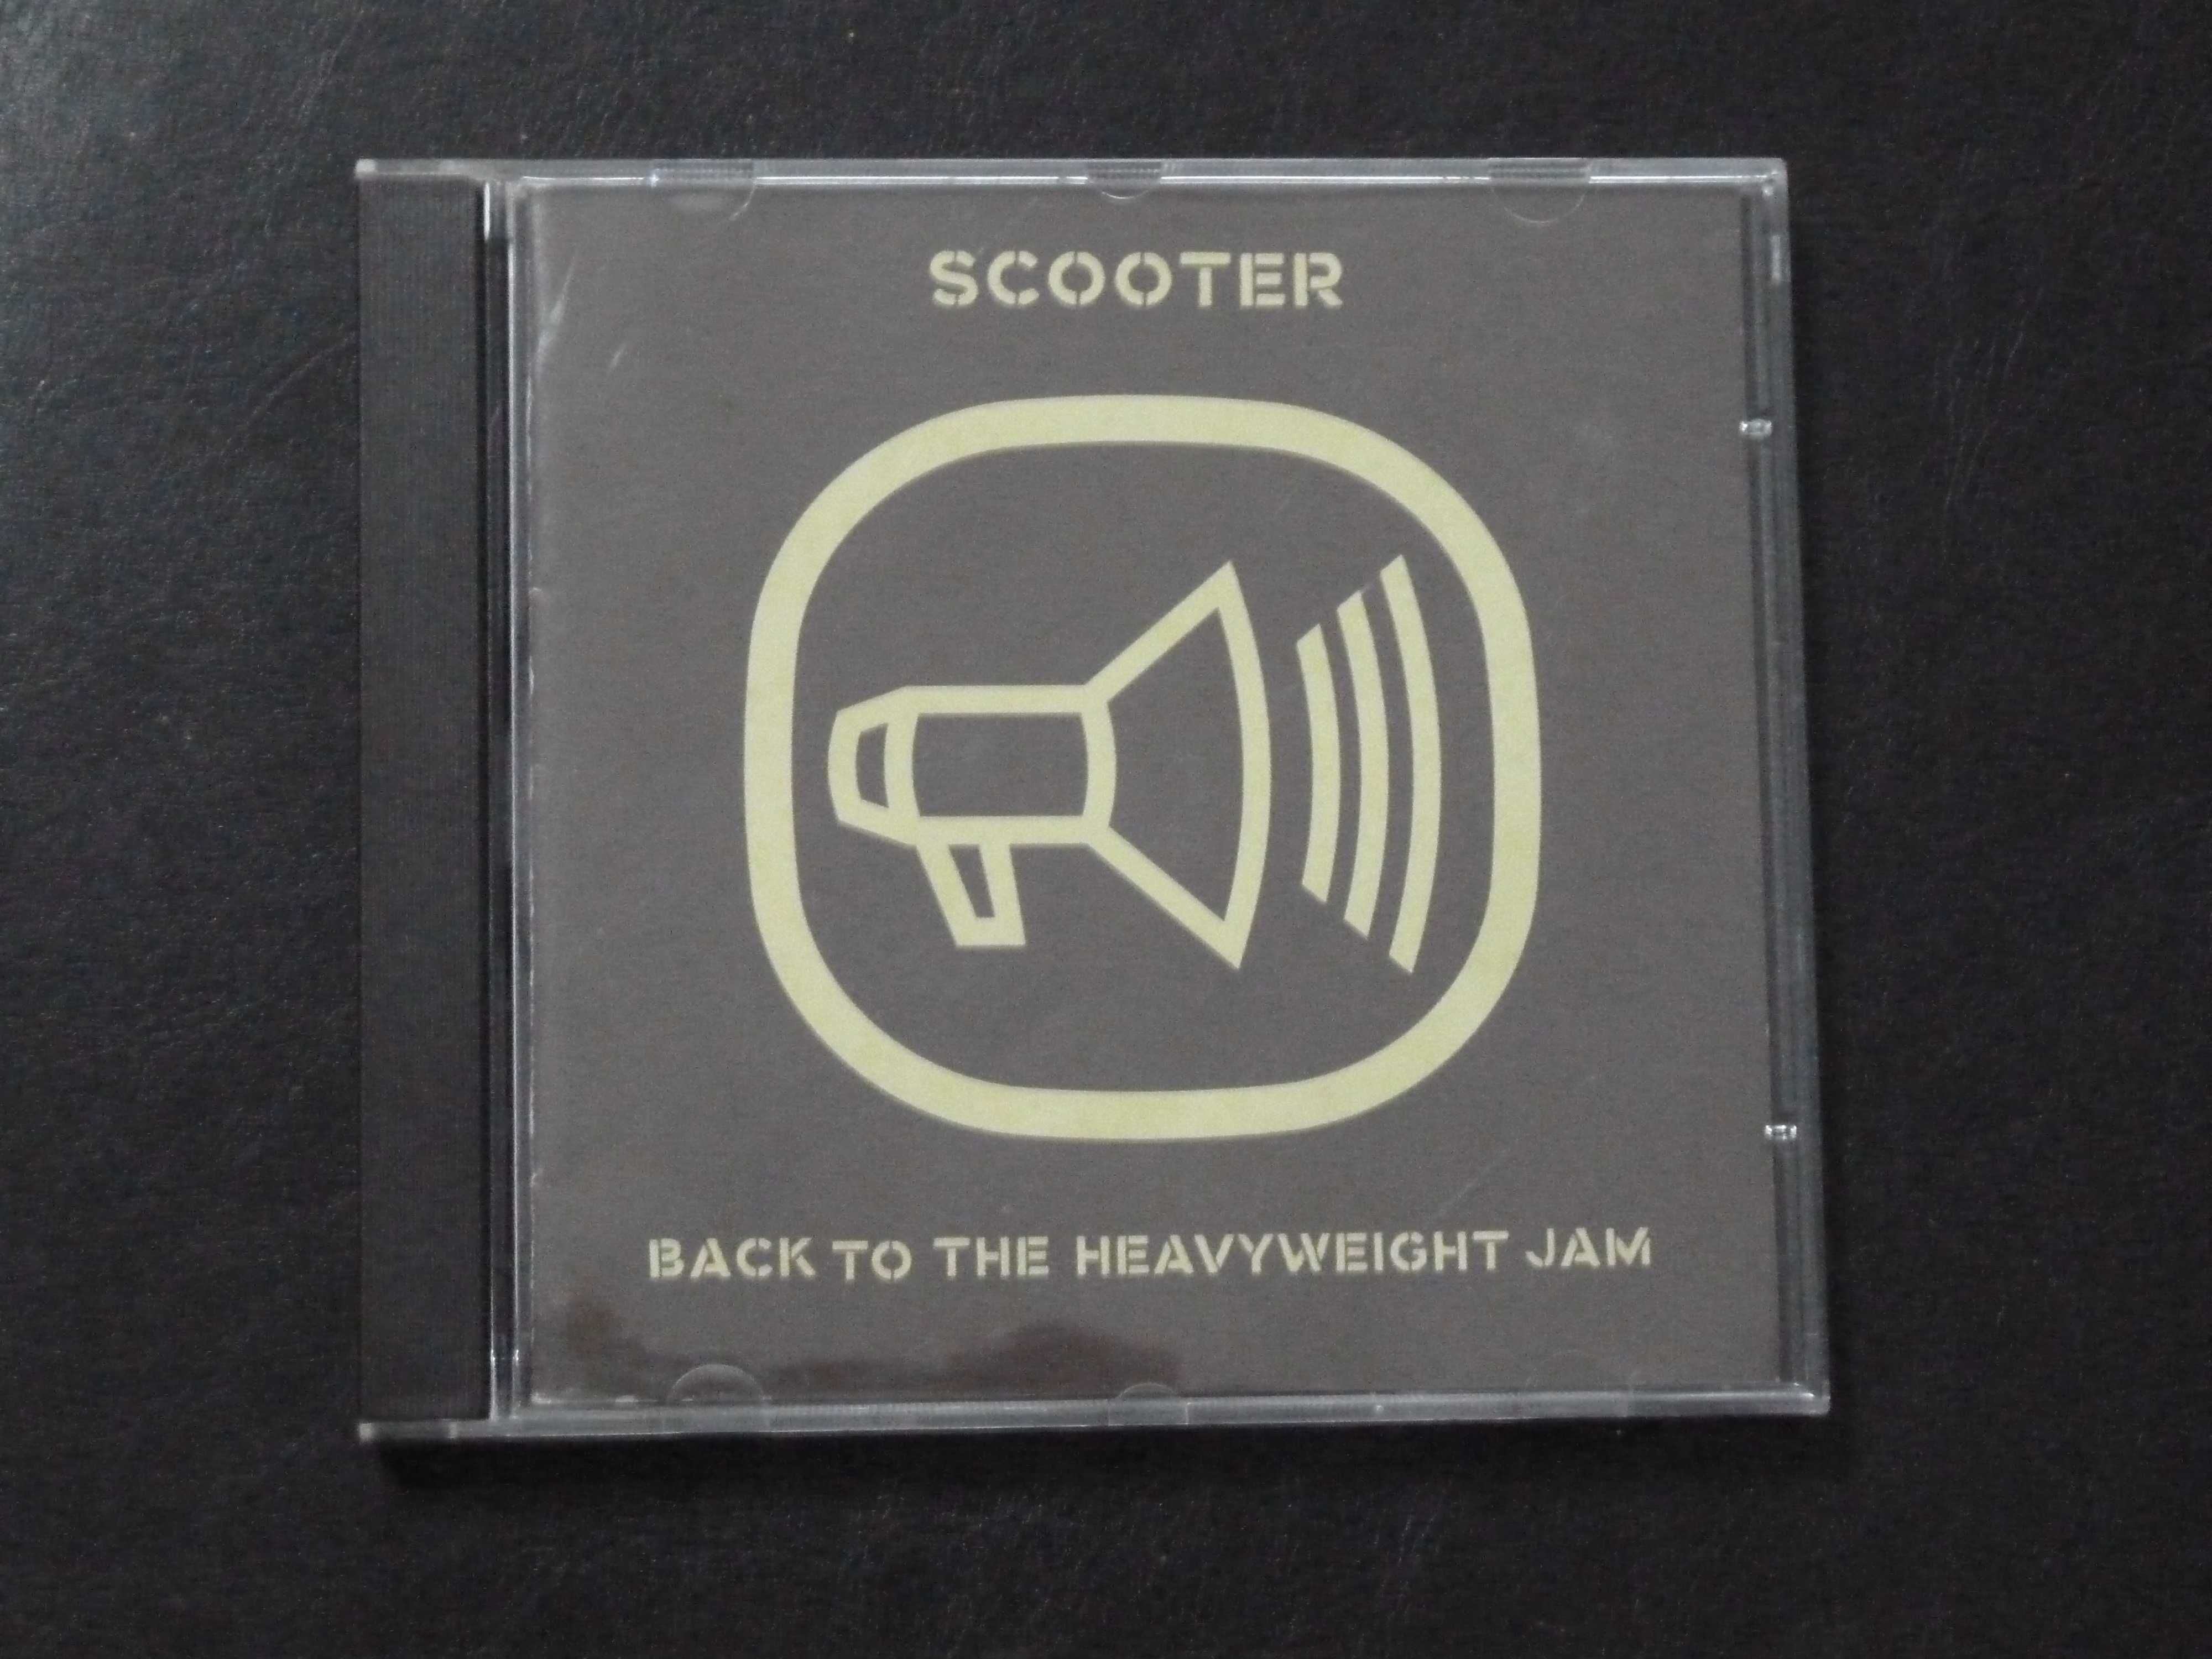 Album CD Scooter " Back to the Heavyweight Jam"